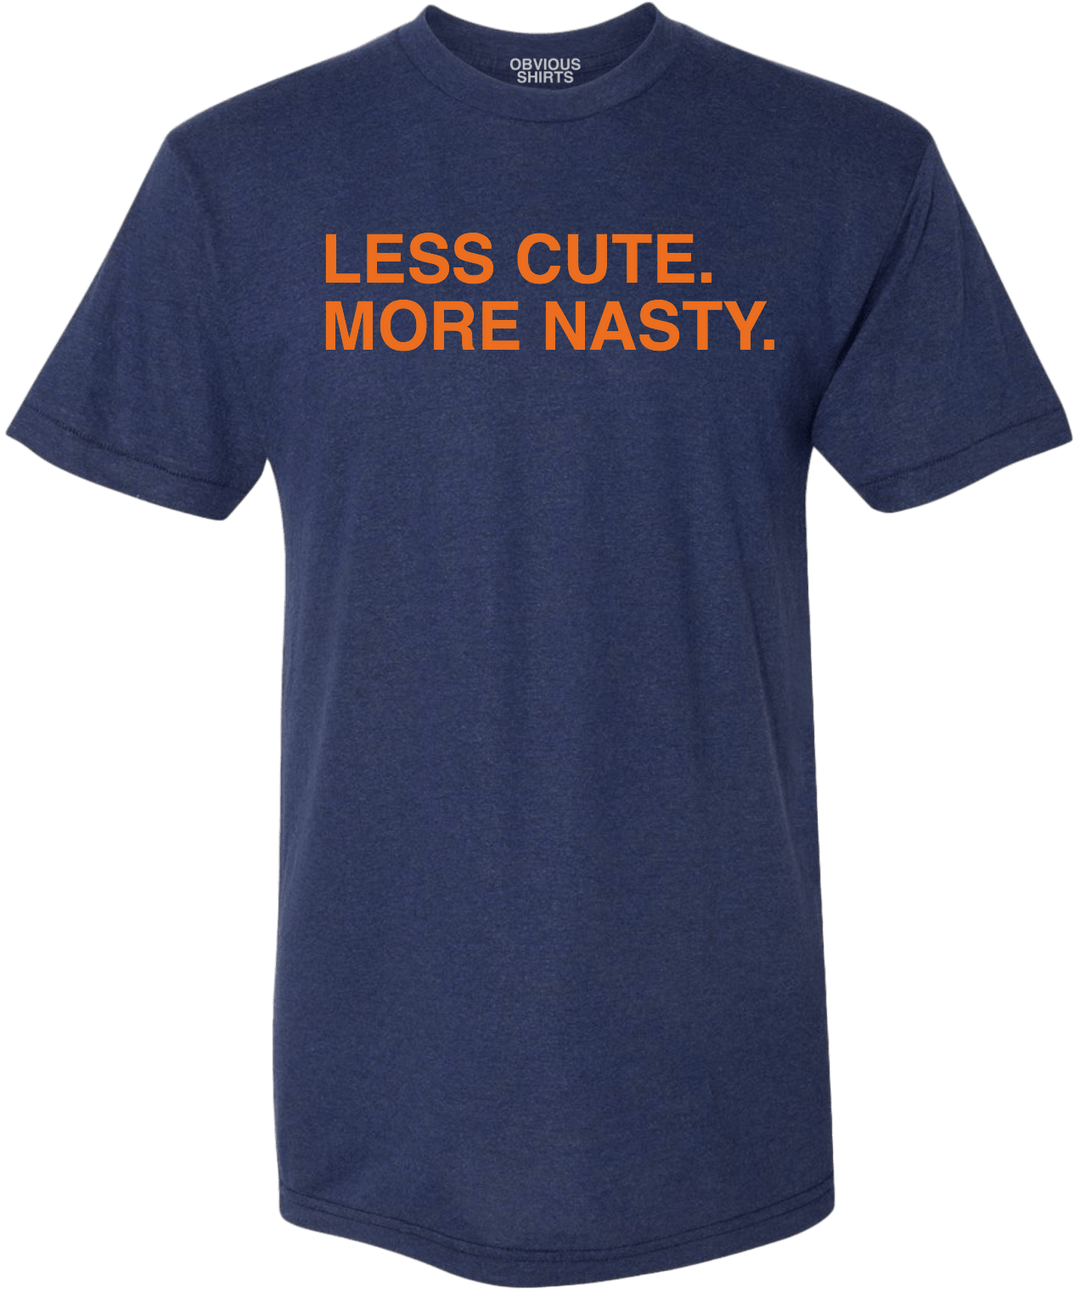 WADDLE & SILVY: LESS CUTE. MORE NASTY. - OBVIOUS SHIRTS.